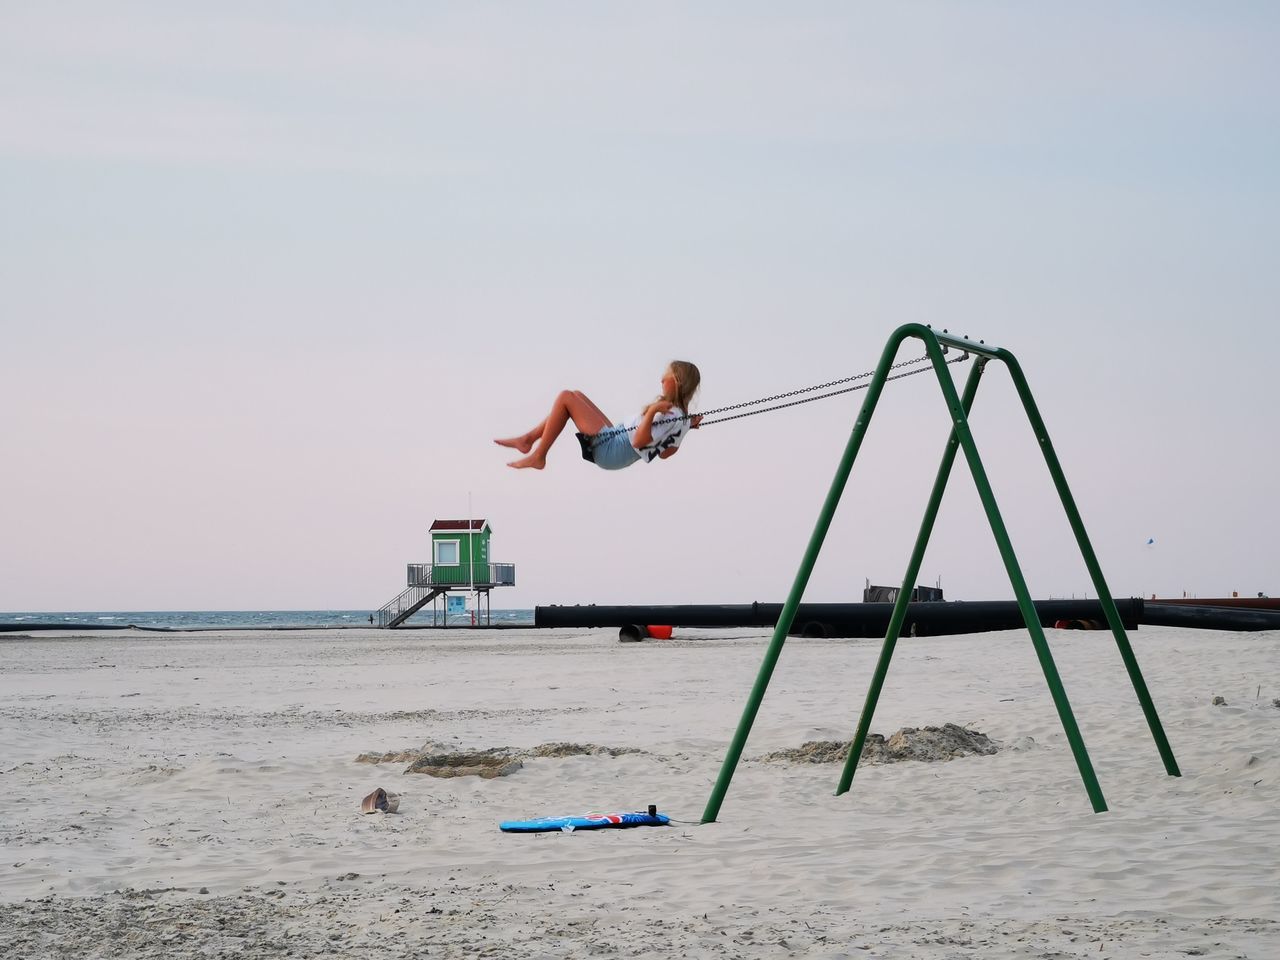 water, beach, sky, nature, sand, land, one person, full length, sea, day, copy space, wind, men, jumping, leisure activity, childhood, motion, outdoors, lifestyles, adult, fun, sports, side view, holiday, playground, clear sky, child, boardsport